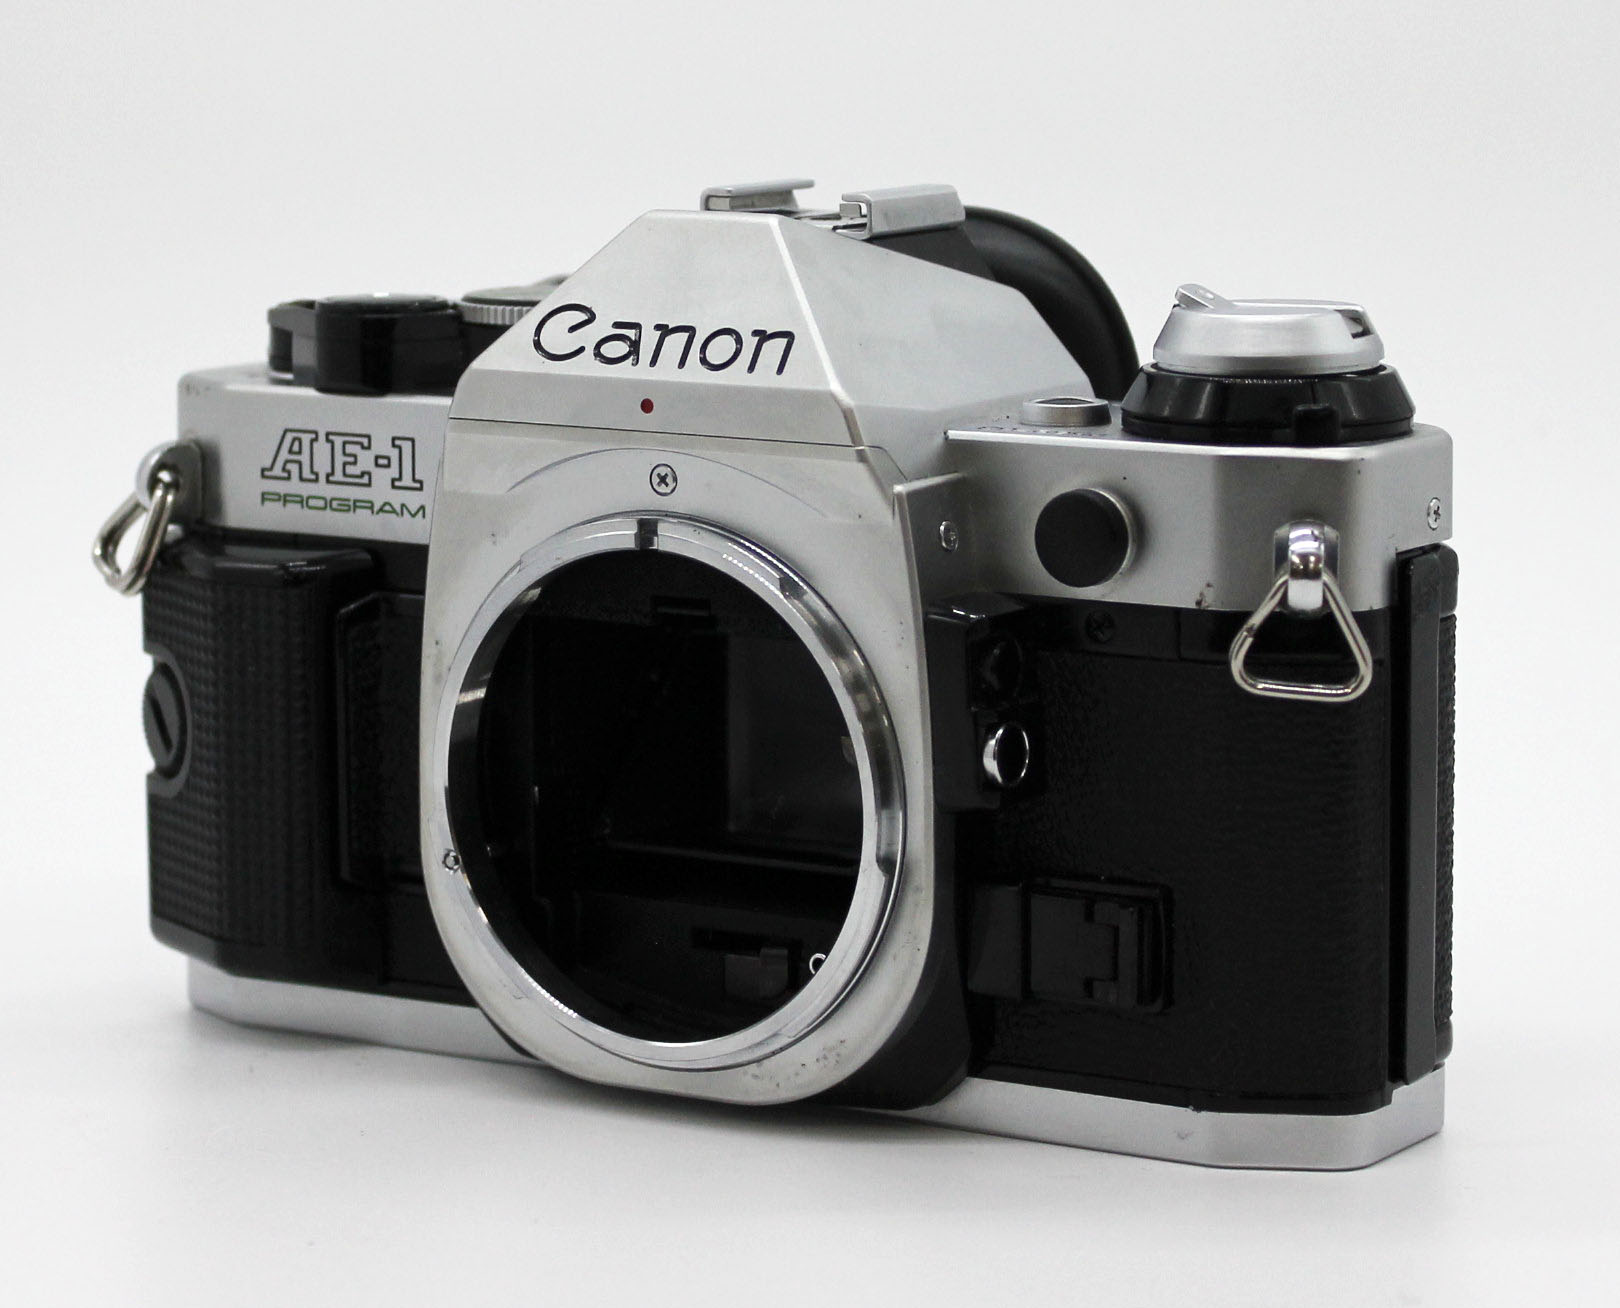 Canon AE-1 Program 35mm SLR Film Camera with New FD NFD 50mm F/1.4 Lens from Japan Photo 1